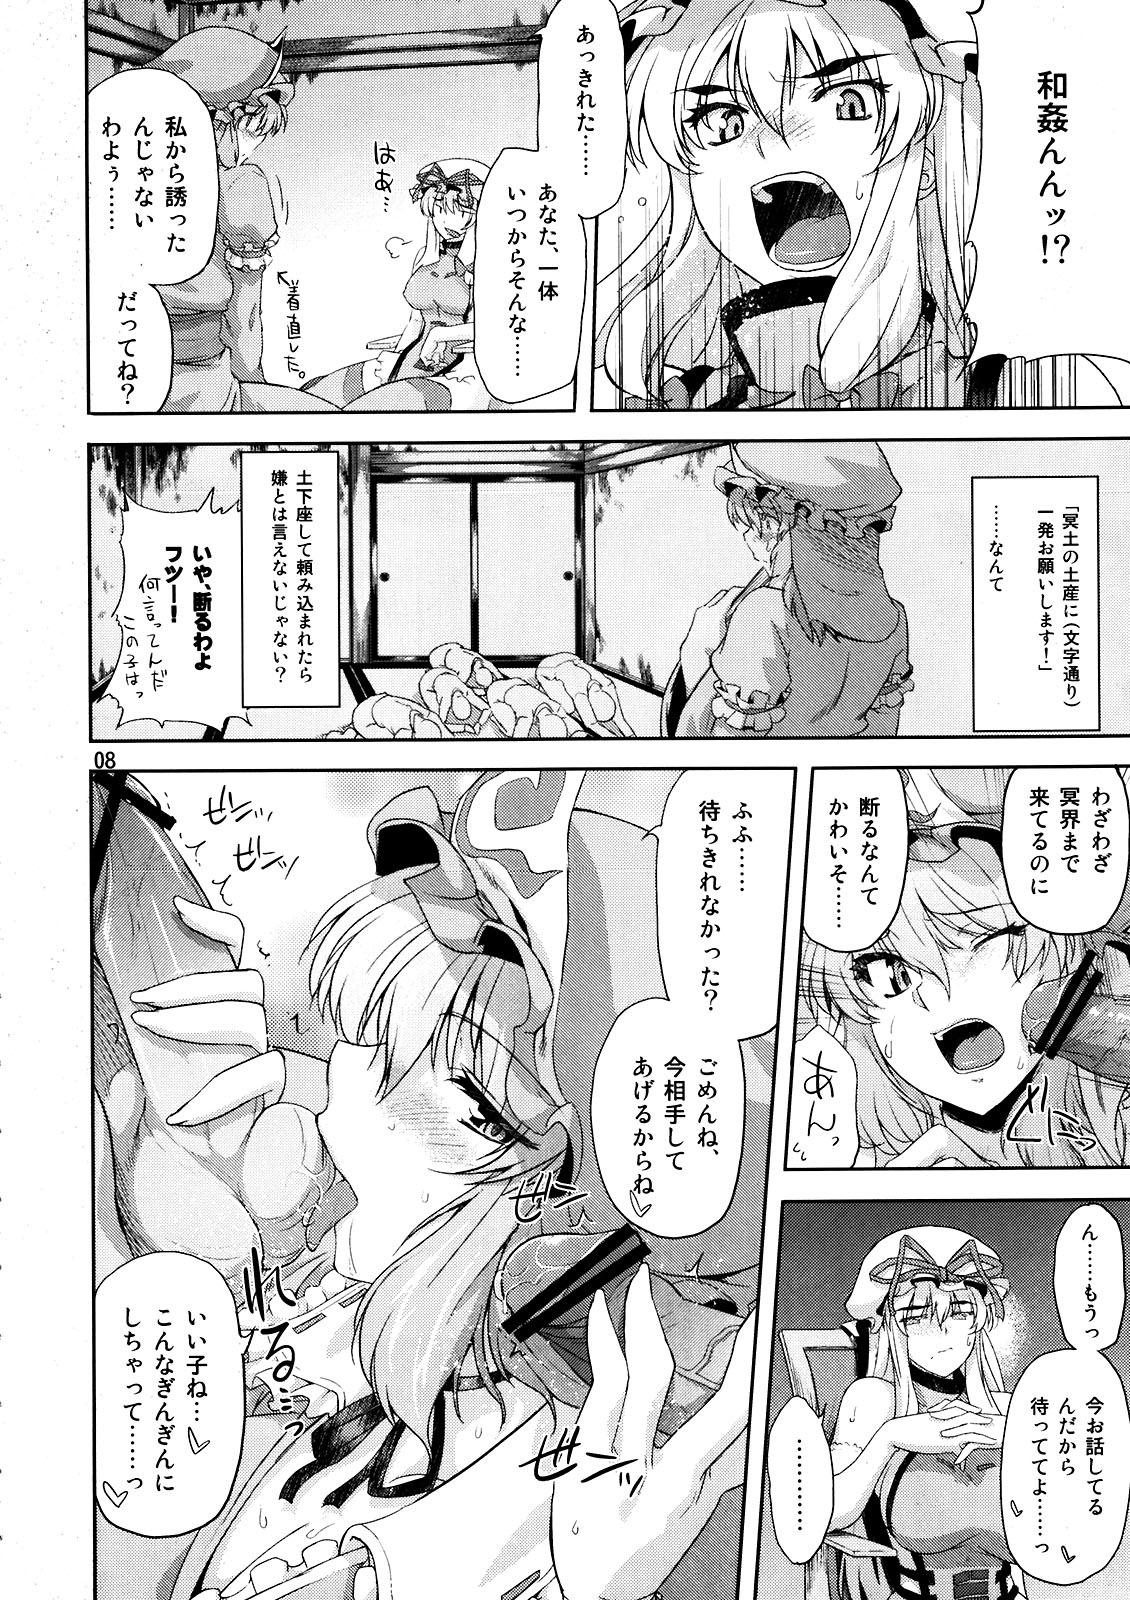 Sexcams Toshimaen 0 - Touhou project Soloboy - Page 8